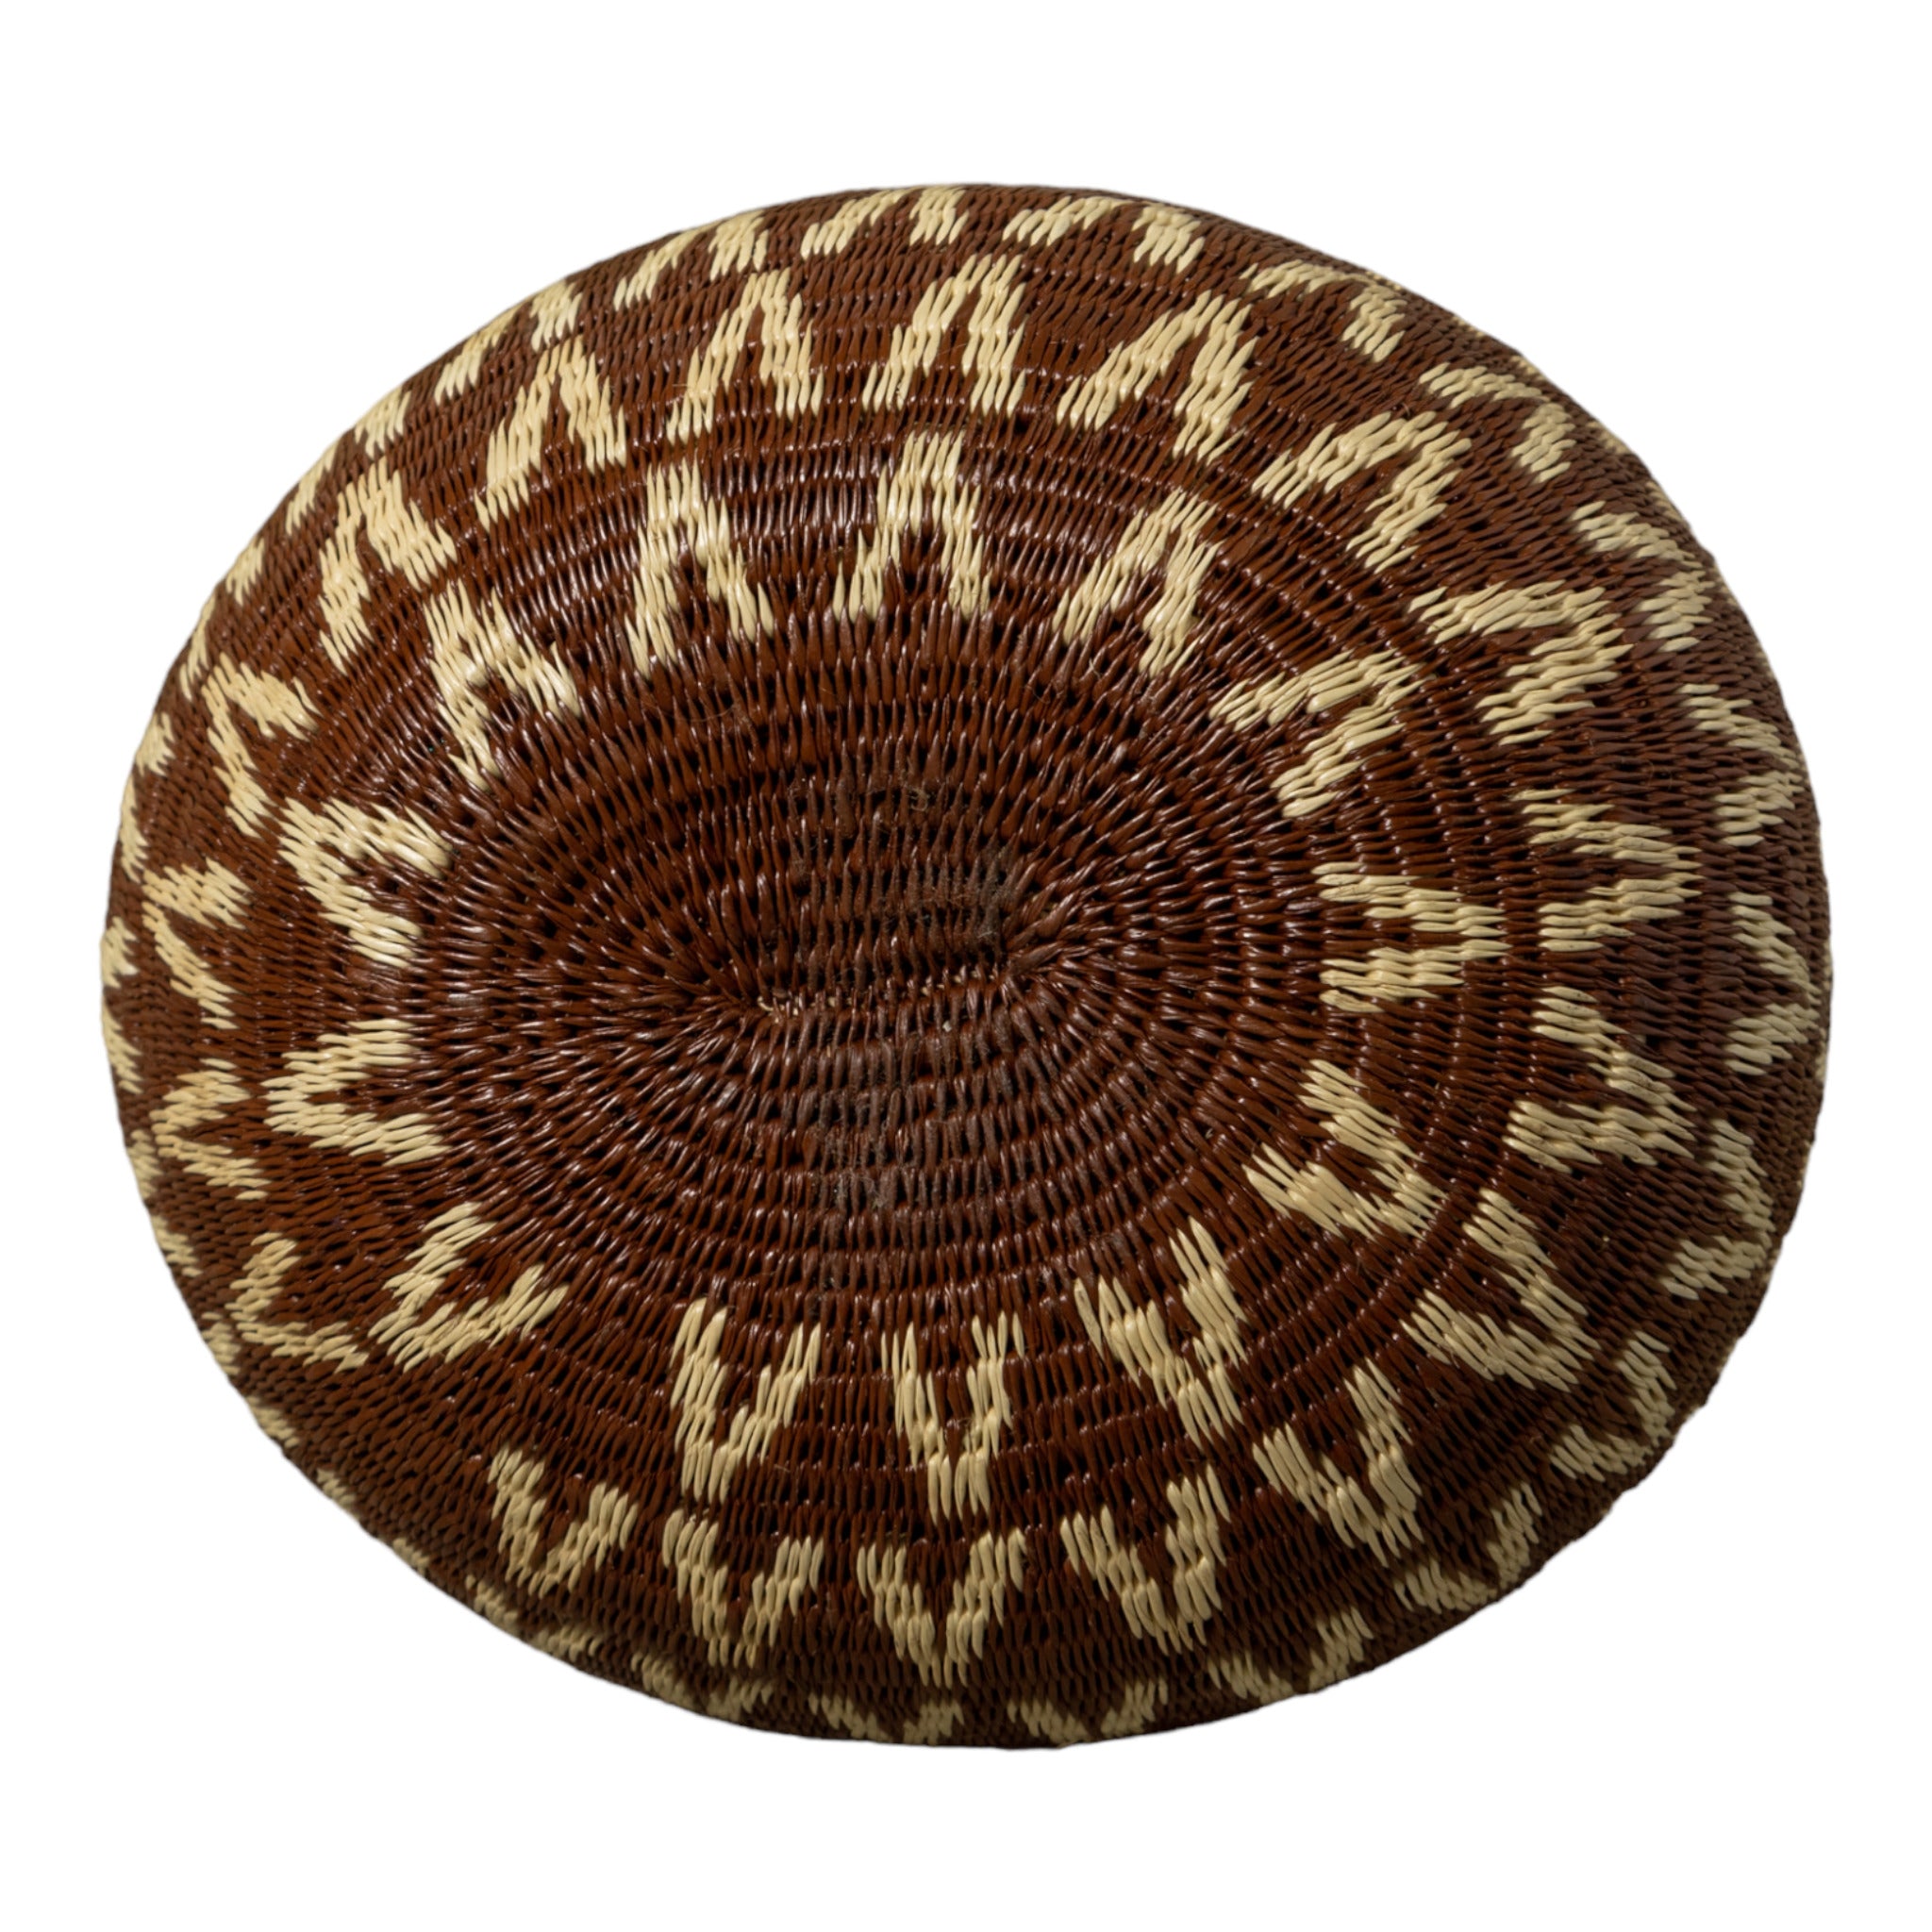 Brown And White Arrow Rainforest Basket